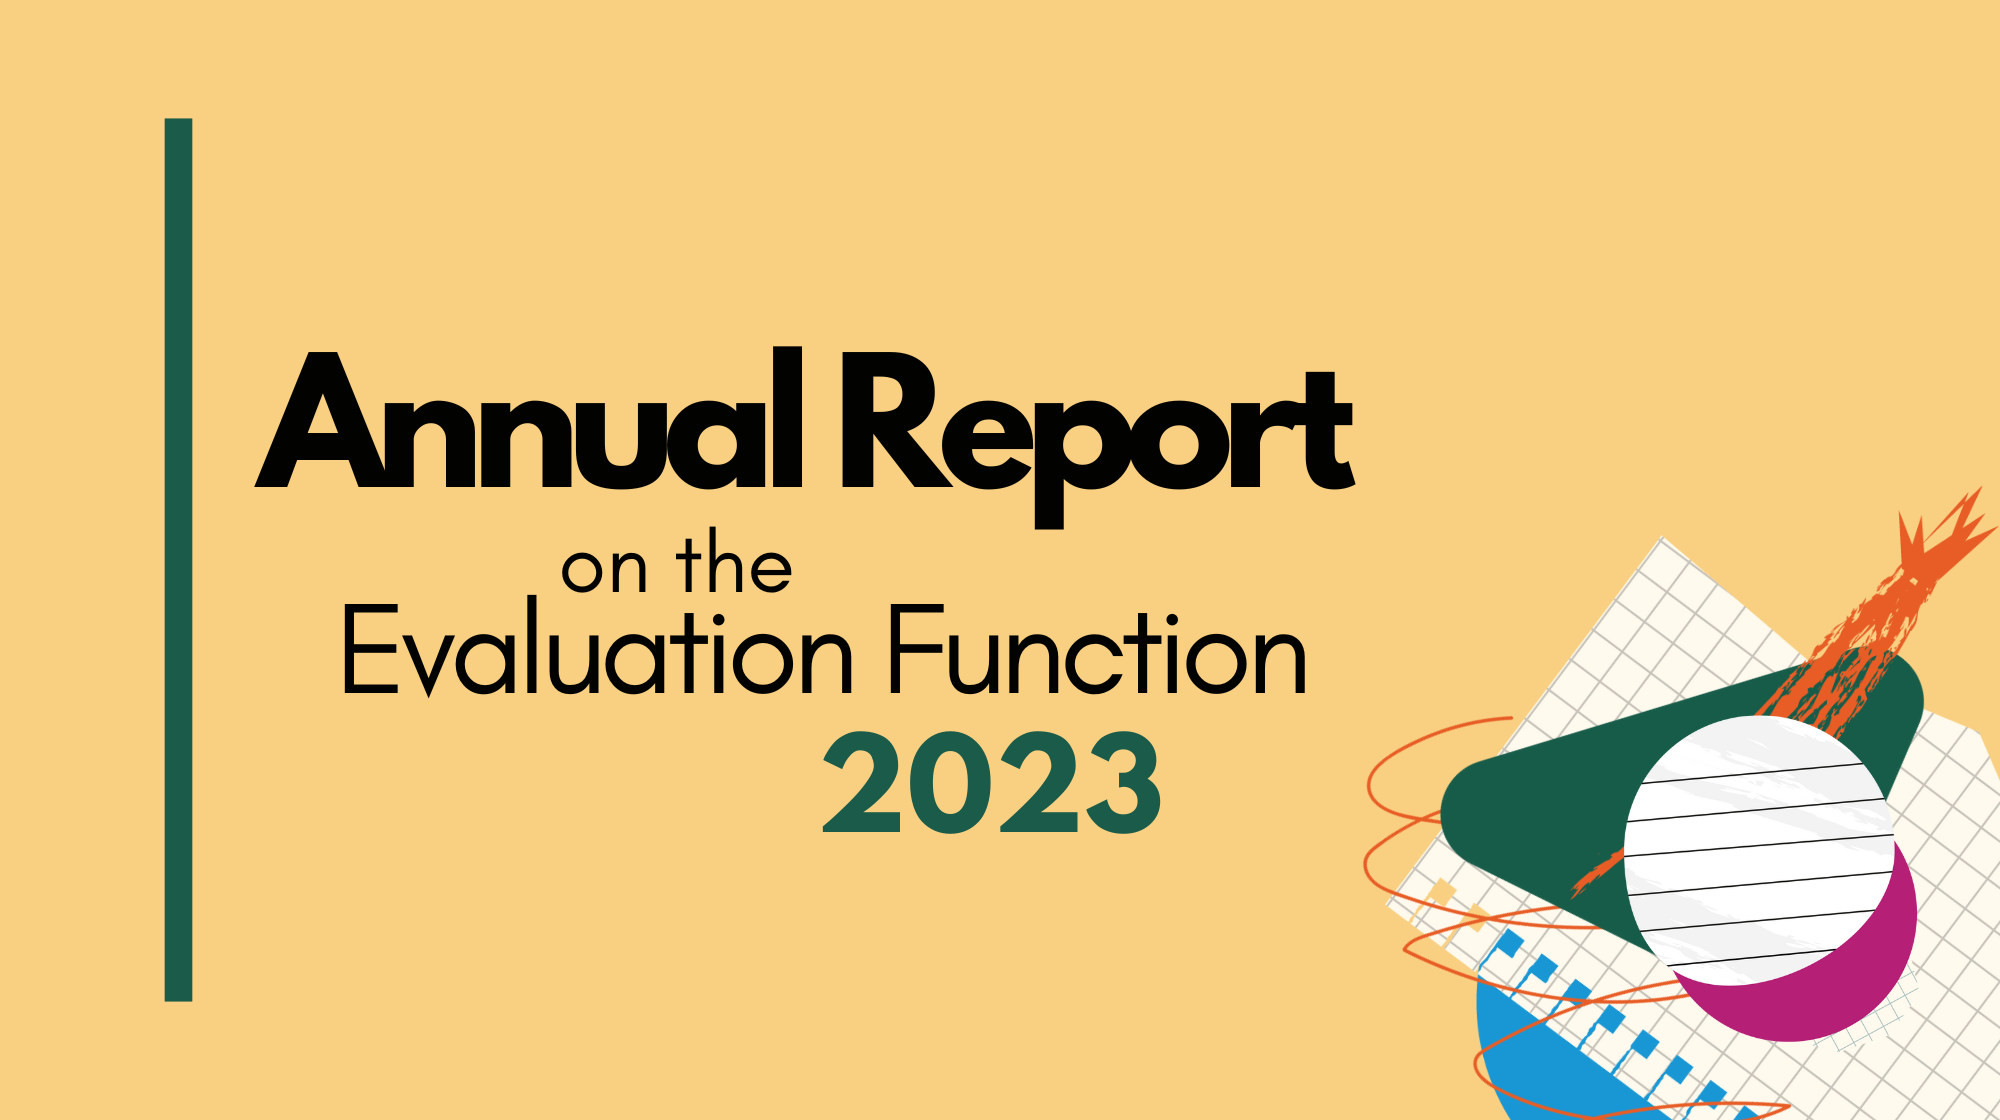 Annual Report on the evaluation function 2023